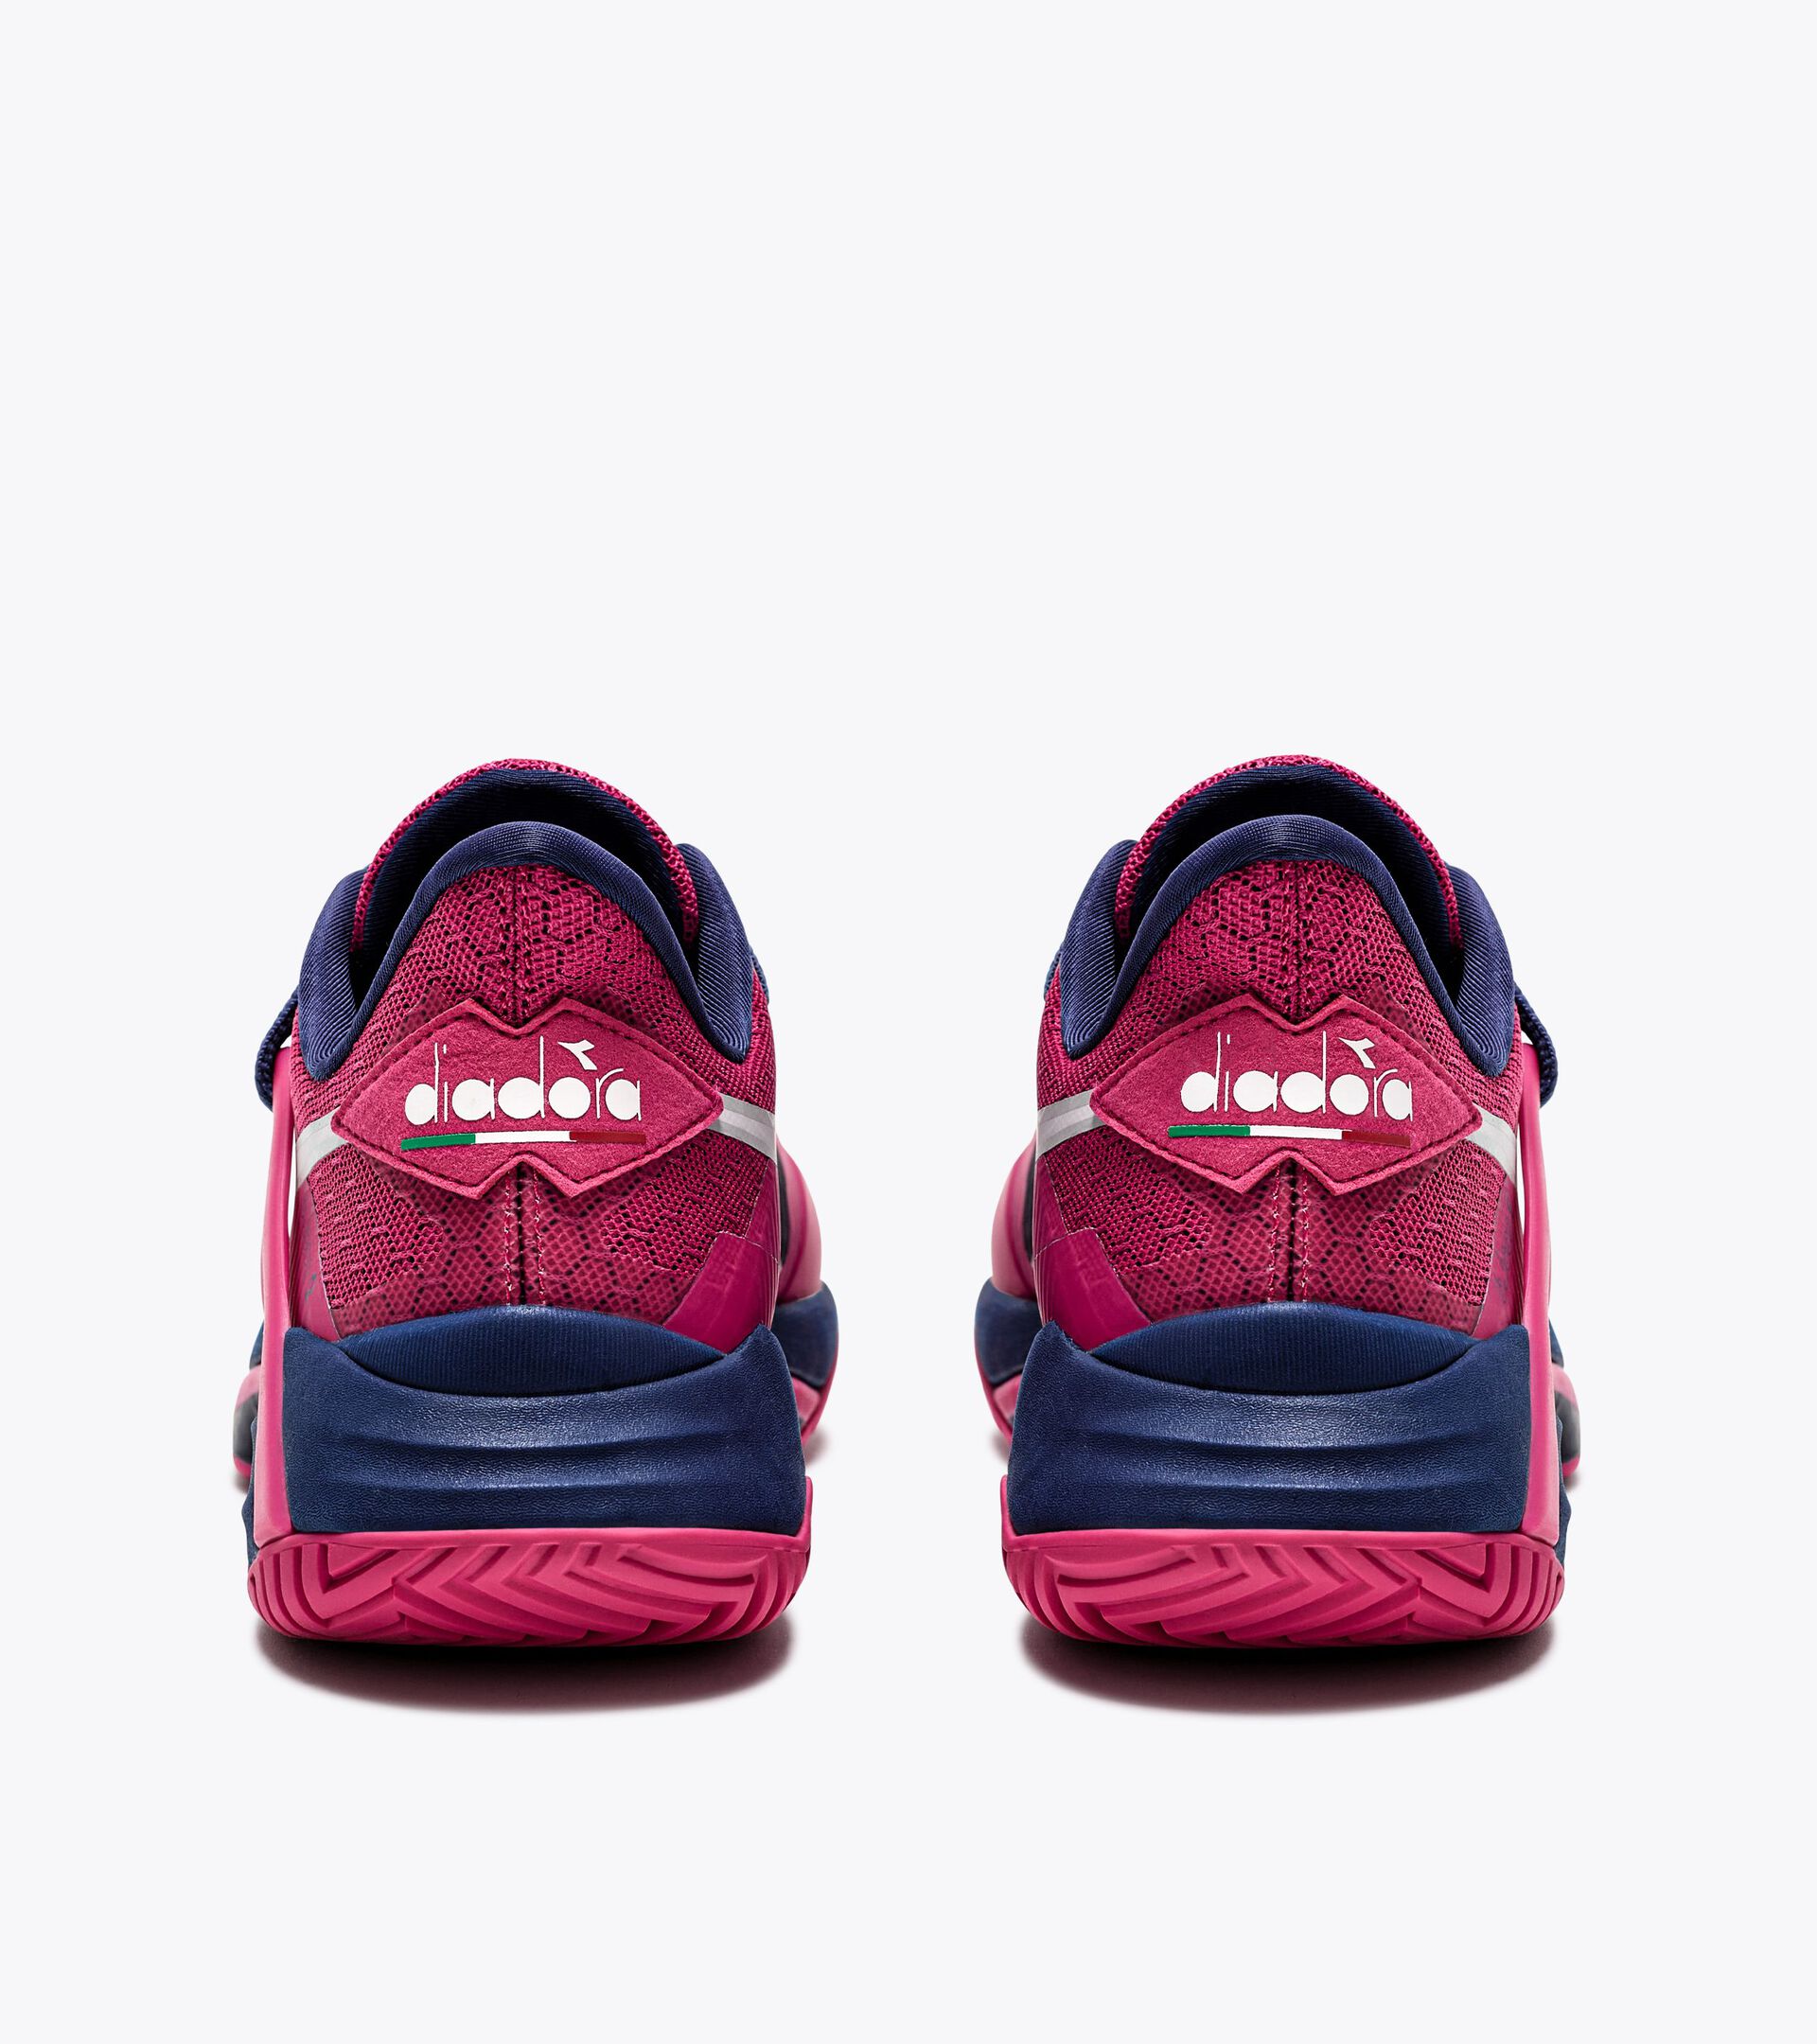 Tennis shoes for hard surfaces or clay courts - Women B.ICON 2 W AG PINK YARROW/WHITE/BLUEPRINT - Diadora